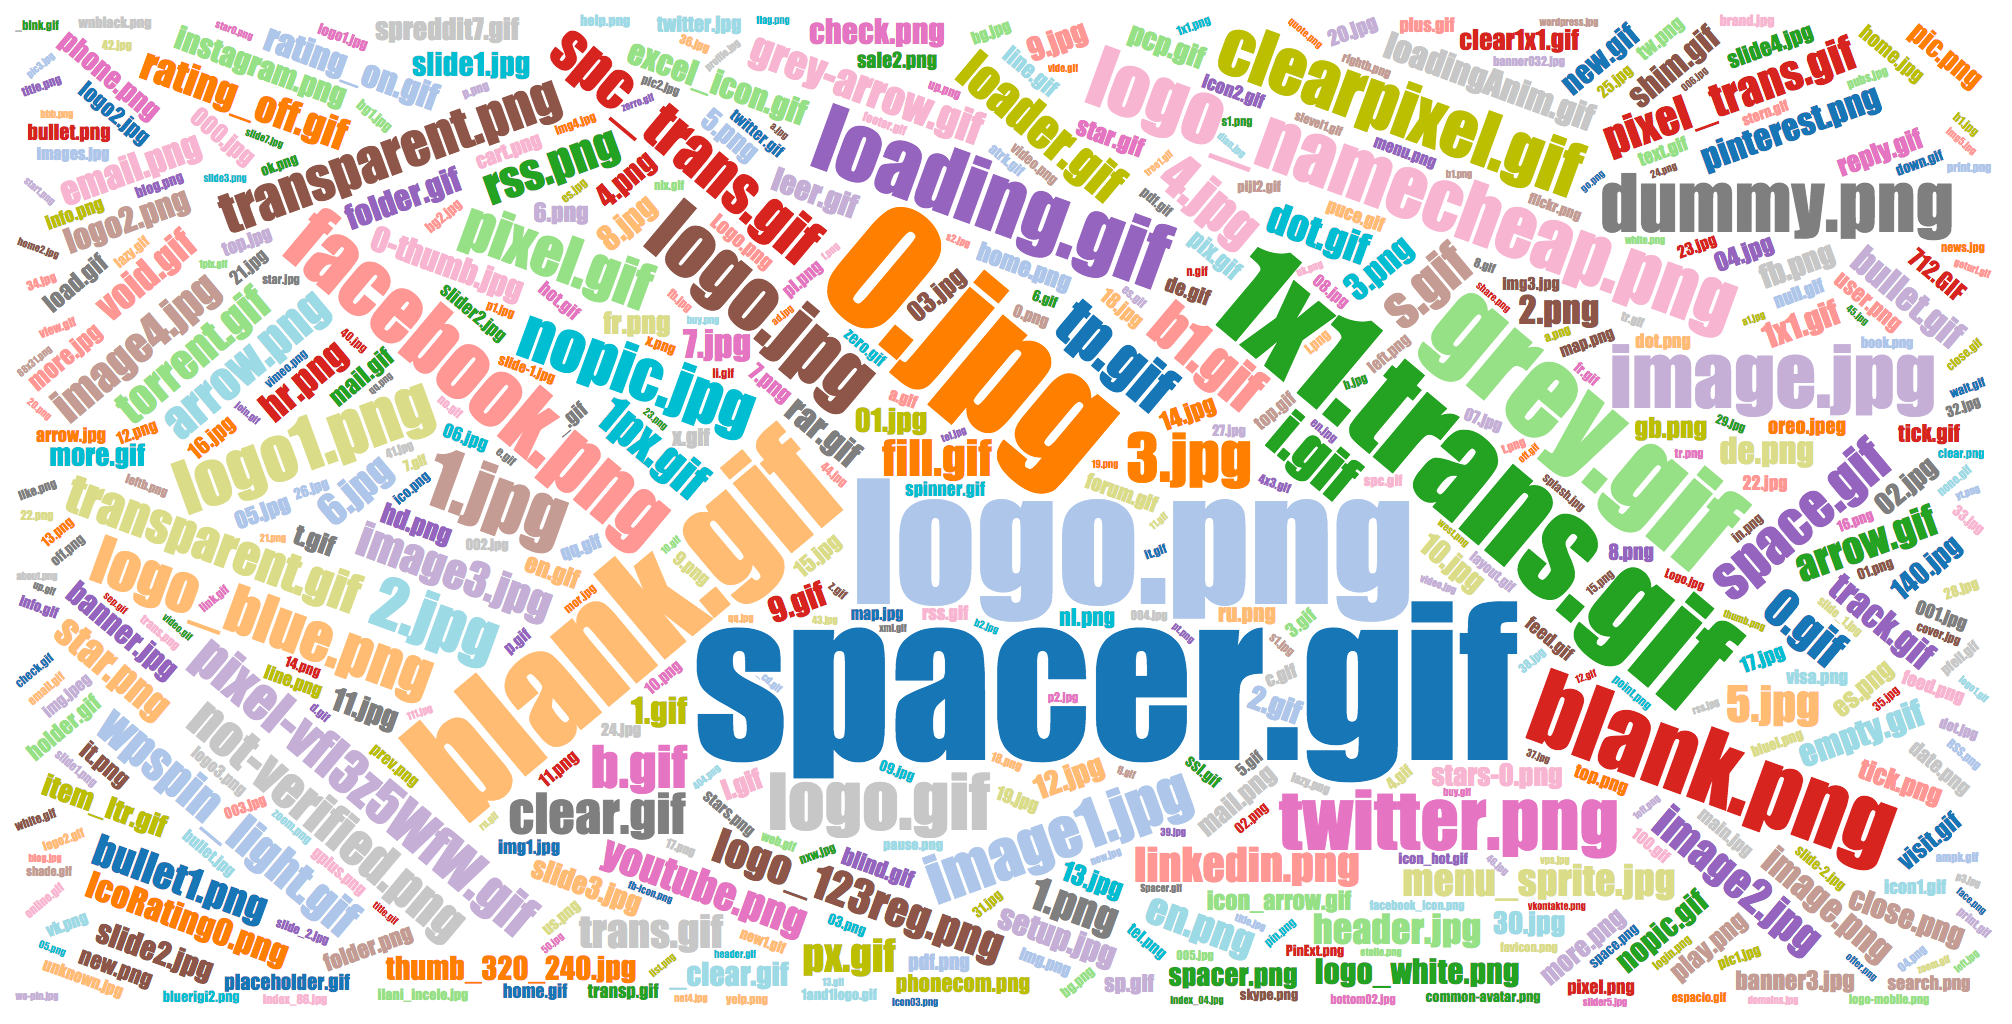 Popular names of IMG files twitter.png, transparent.png, etc.